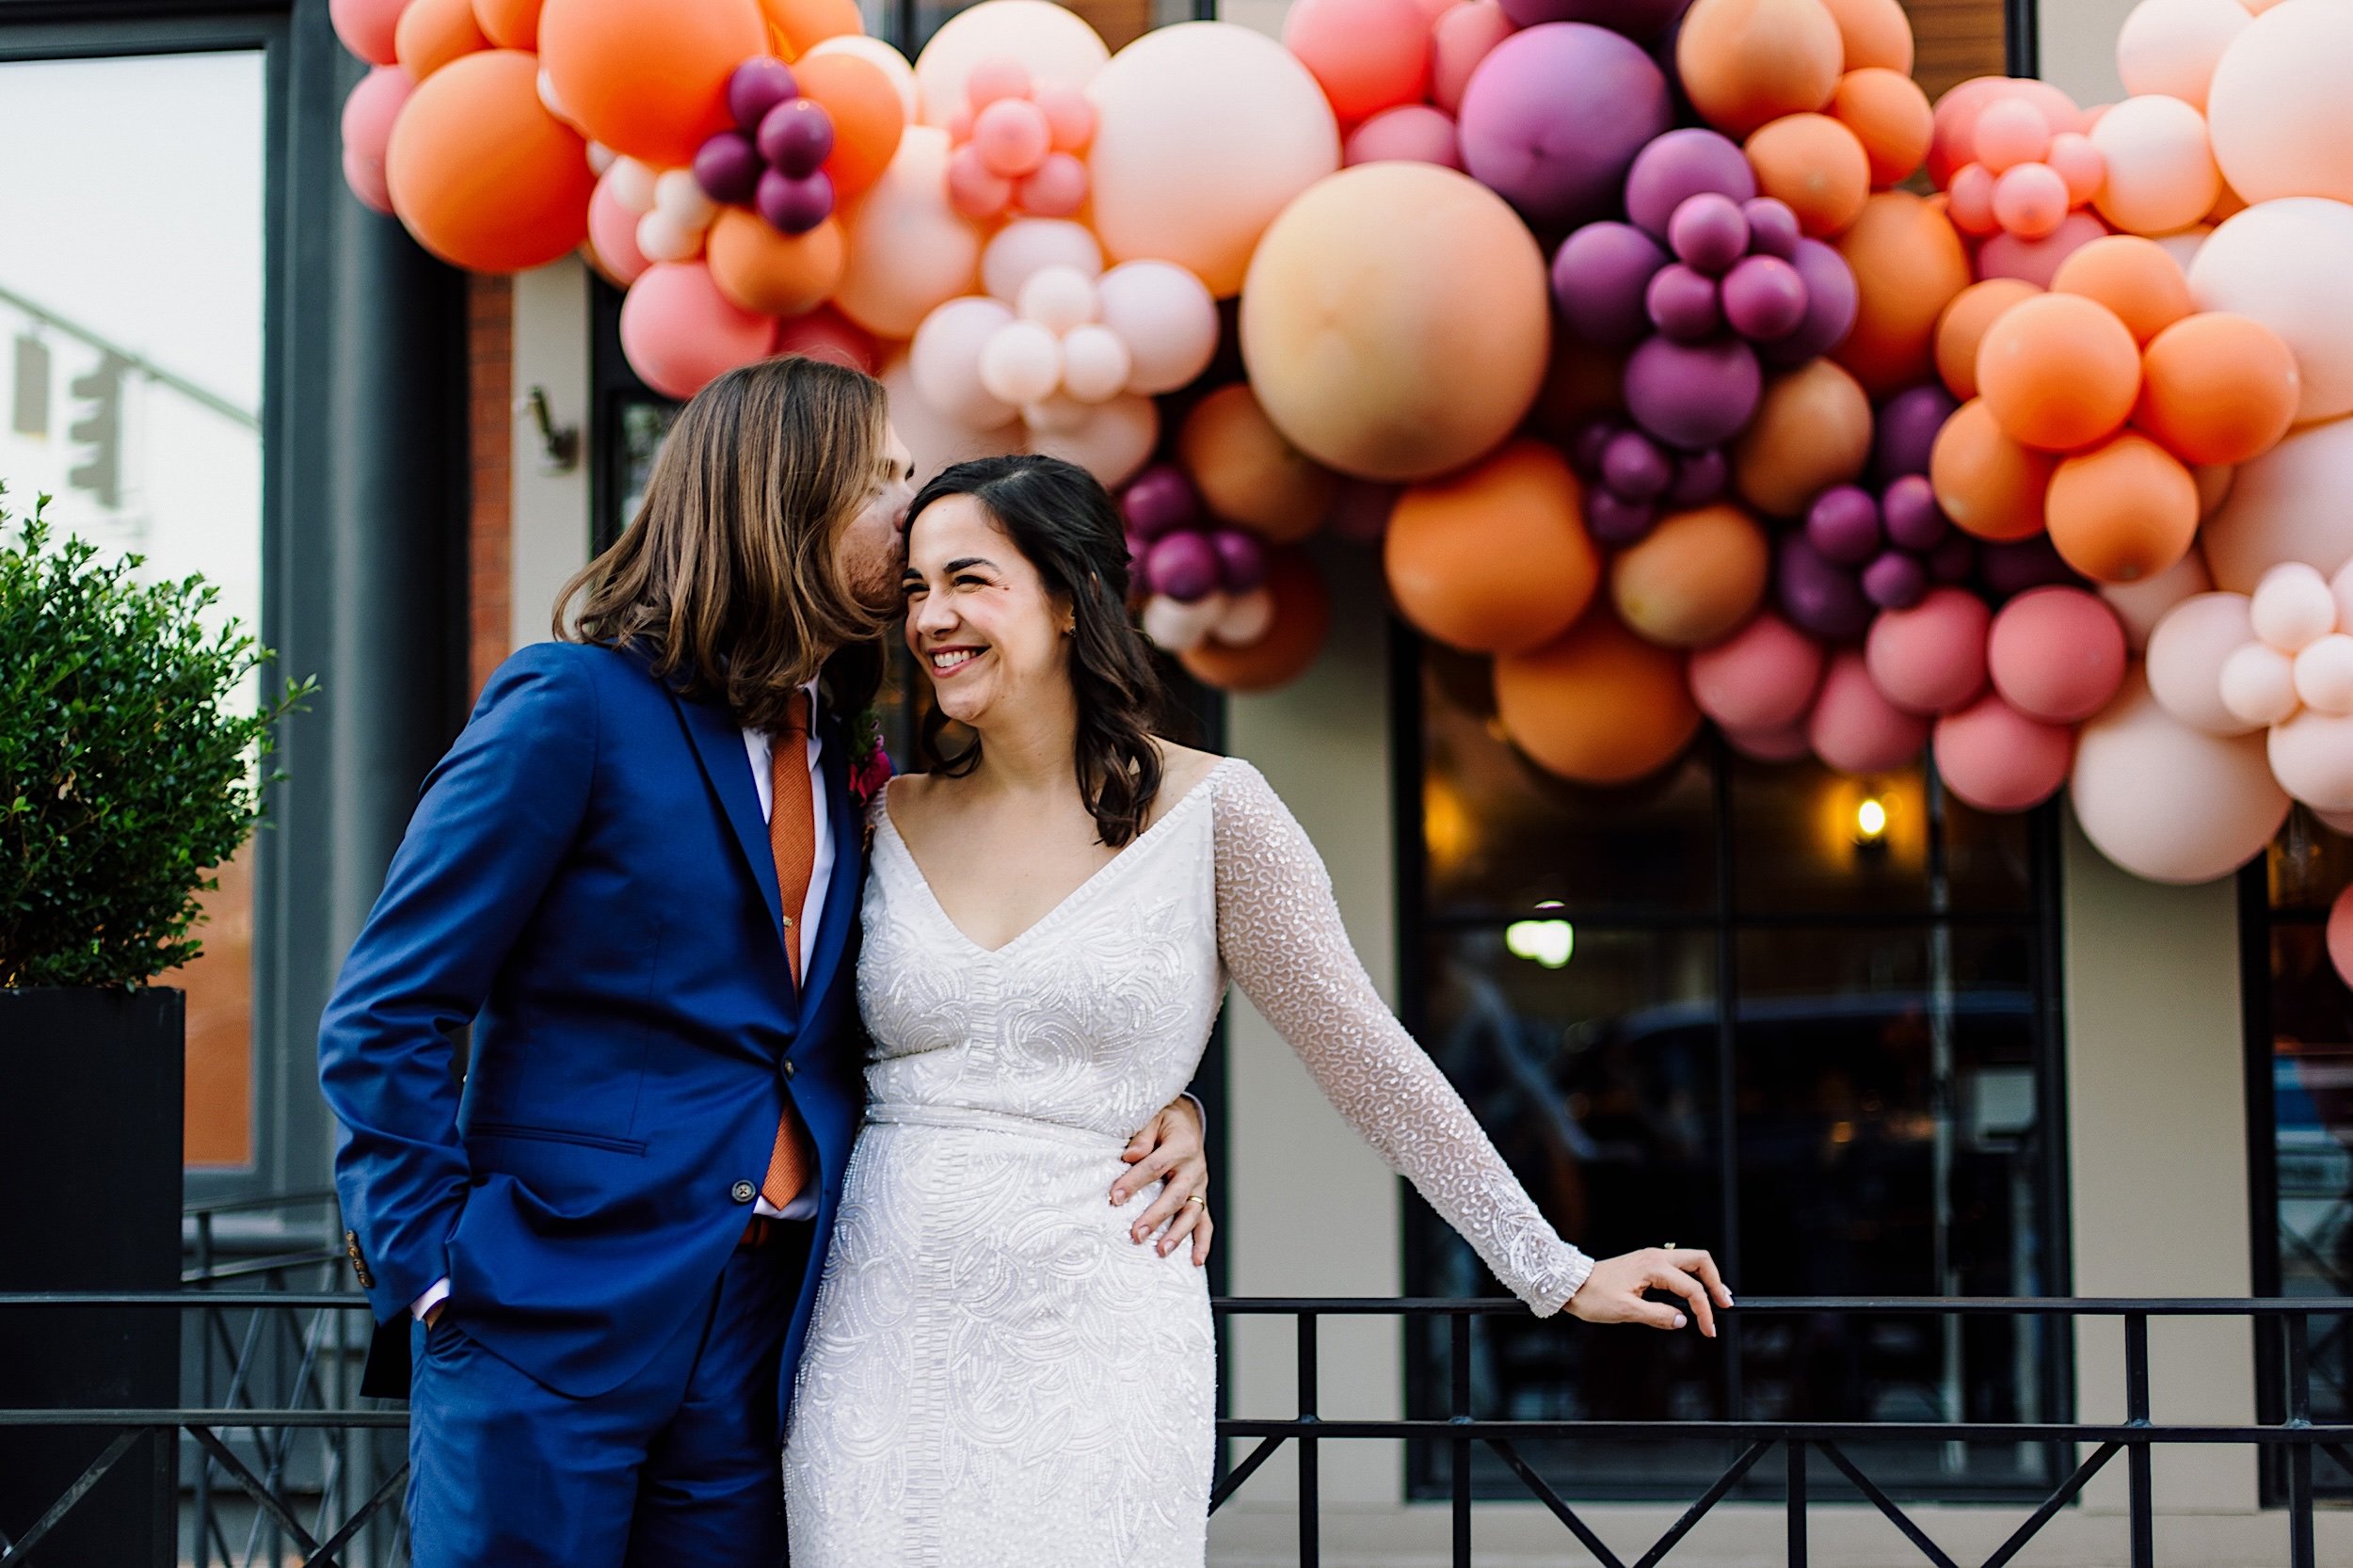 101-ZacWolfPhotography-20221015-Blog_Bride-and-Groom-in-front-of-Balloon-arch-at-wedding.jpg